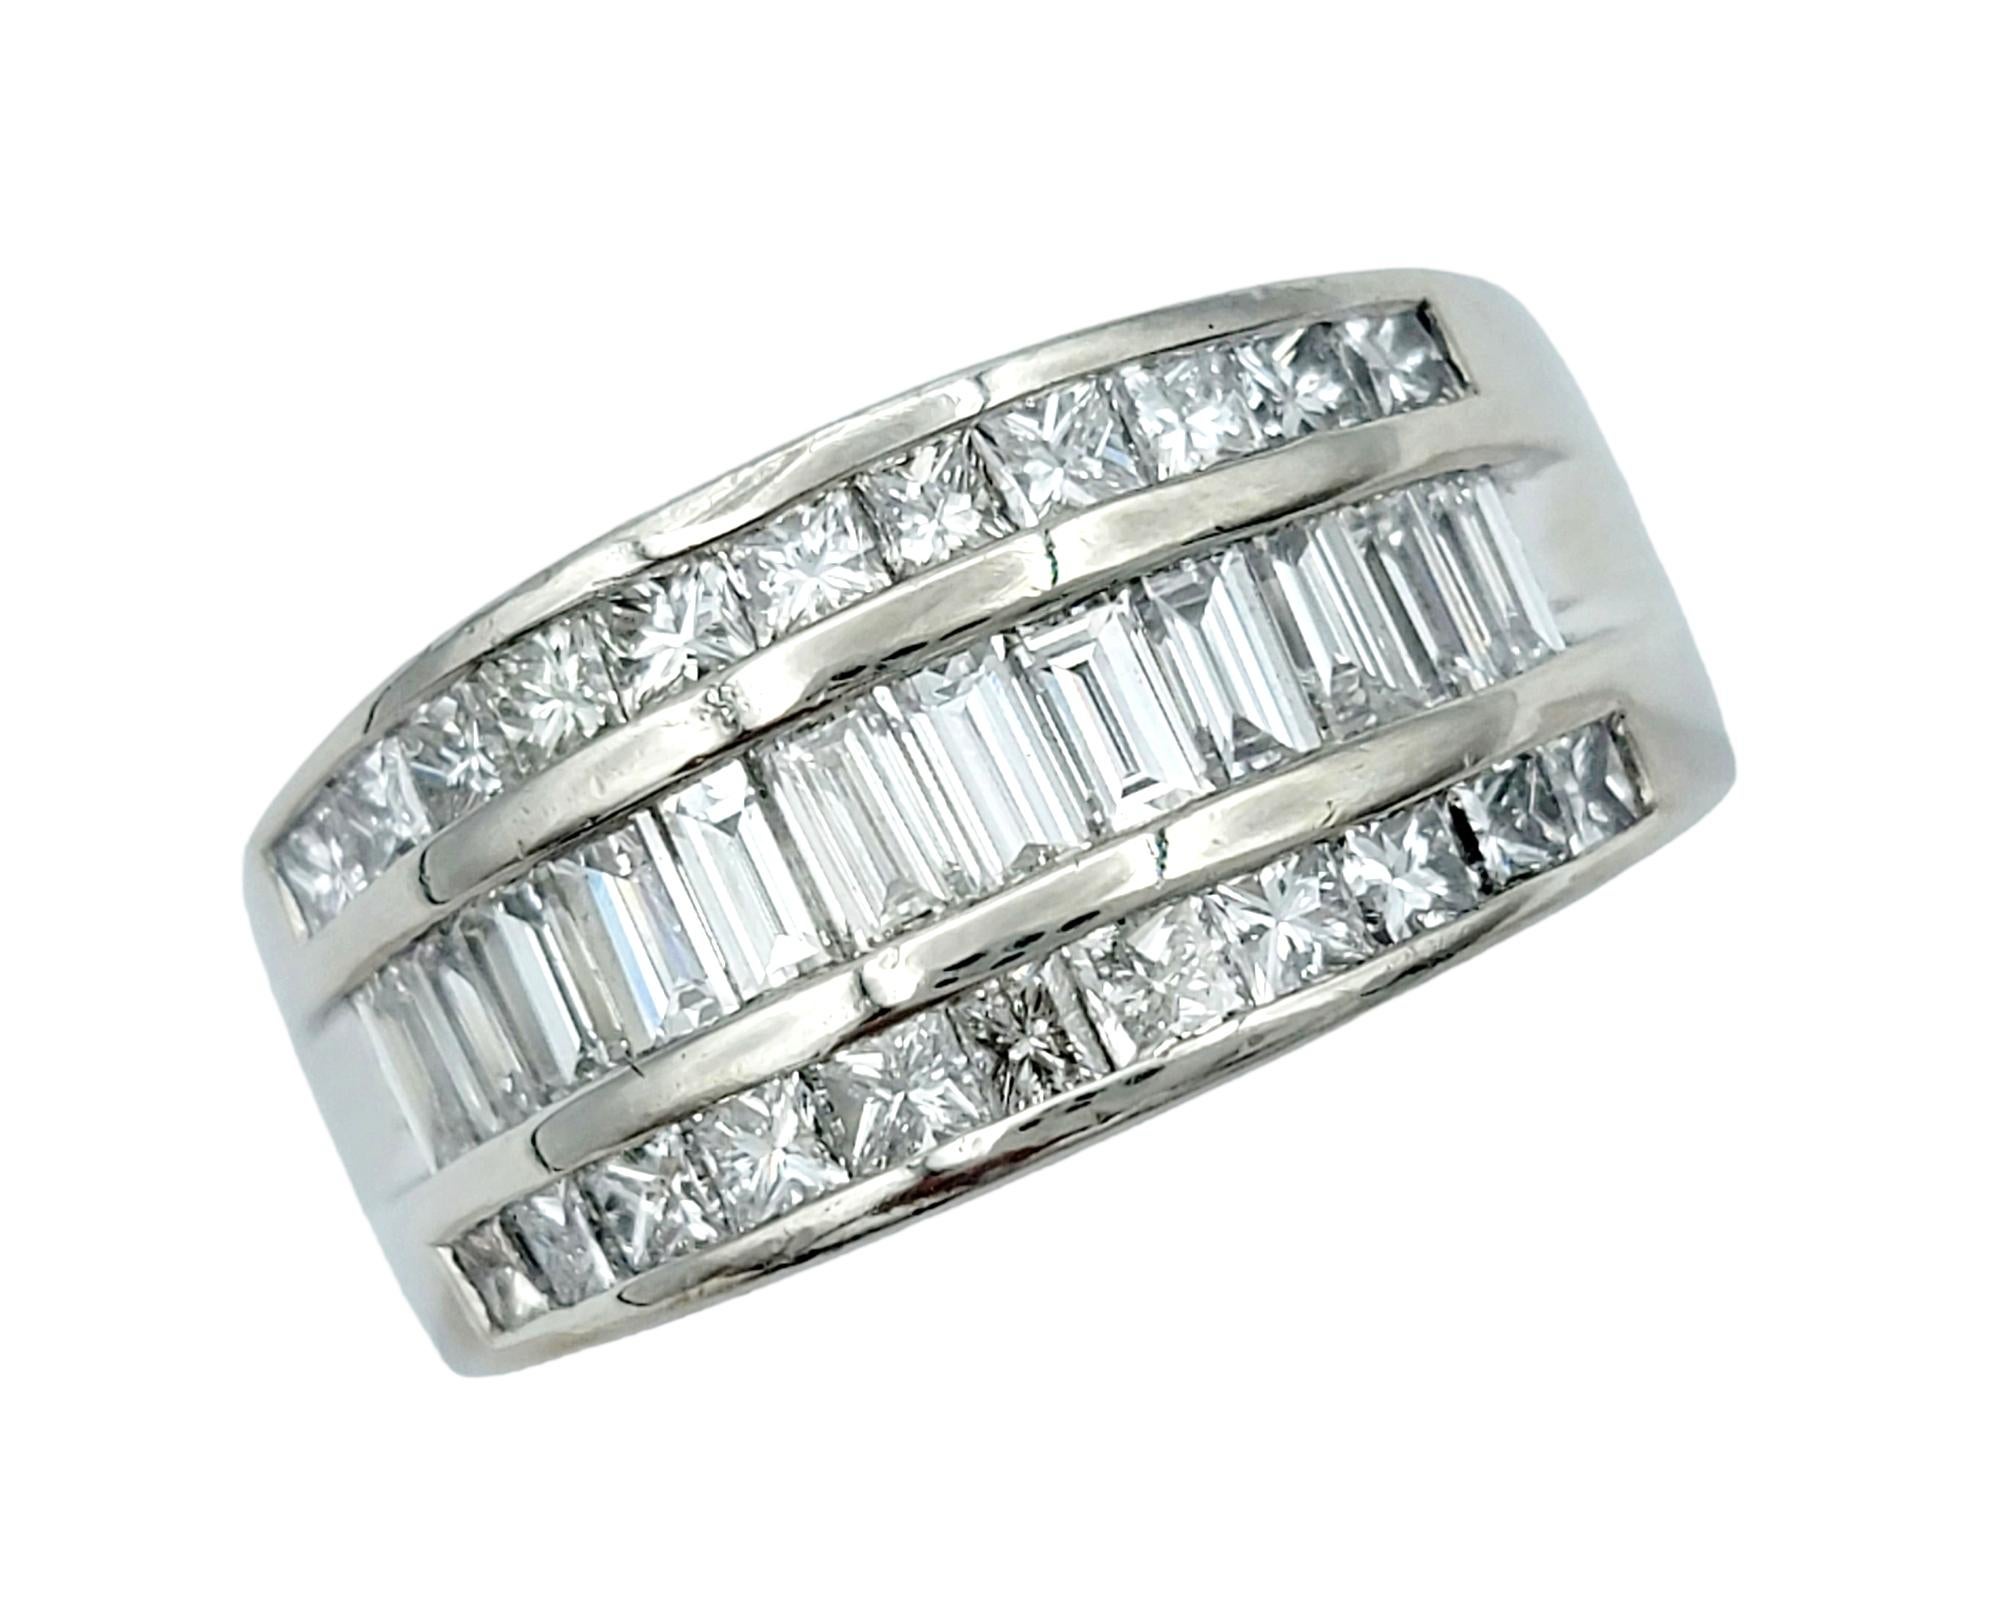 Ring size: 7.25

Absolutely gorgeous multi row diamond semi-eternity band ring. This remarkable ring features glittering rows of icy white diamonds that shimmer and shine from every angle, beautifully enhancing the polished platinum setting. 

The